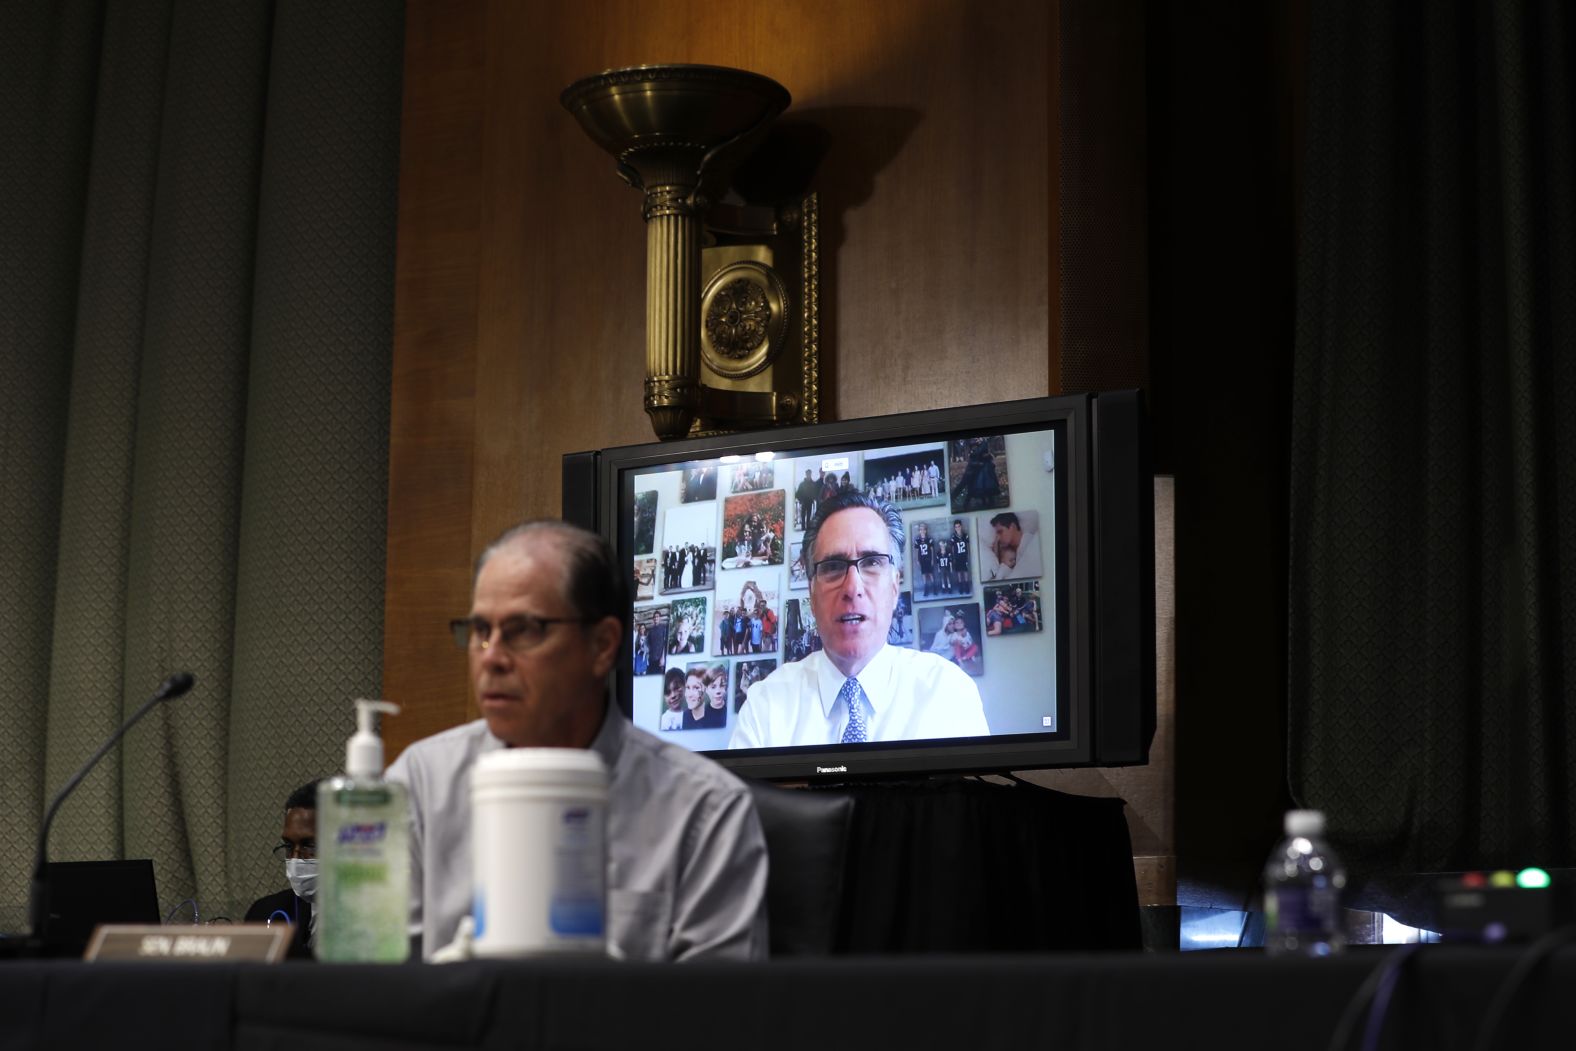 Sen. Mitt Romney speaks via teleconference behind Sen. Mike Braun. "The President said the other day that President Obama is responsible for lack of vaccine. Dr. Fauci, is President Obama — or by extension President Trump — did they do something that made the likelihood of creating the vaccine less likely?" <a href="https://www.cnn.com/politics/live-news/fauci-testifies-coronavirus-05-12-2020/h_8b72e965e9227abdcef76327da4b499e" target="_blank">Romney asked.</a> Fauci said neither  Trump nor Obama are responsible for the lack of a coronavirus vaccine.